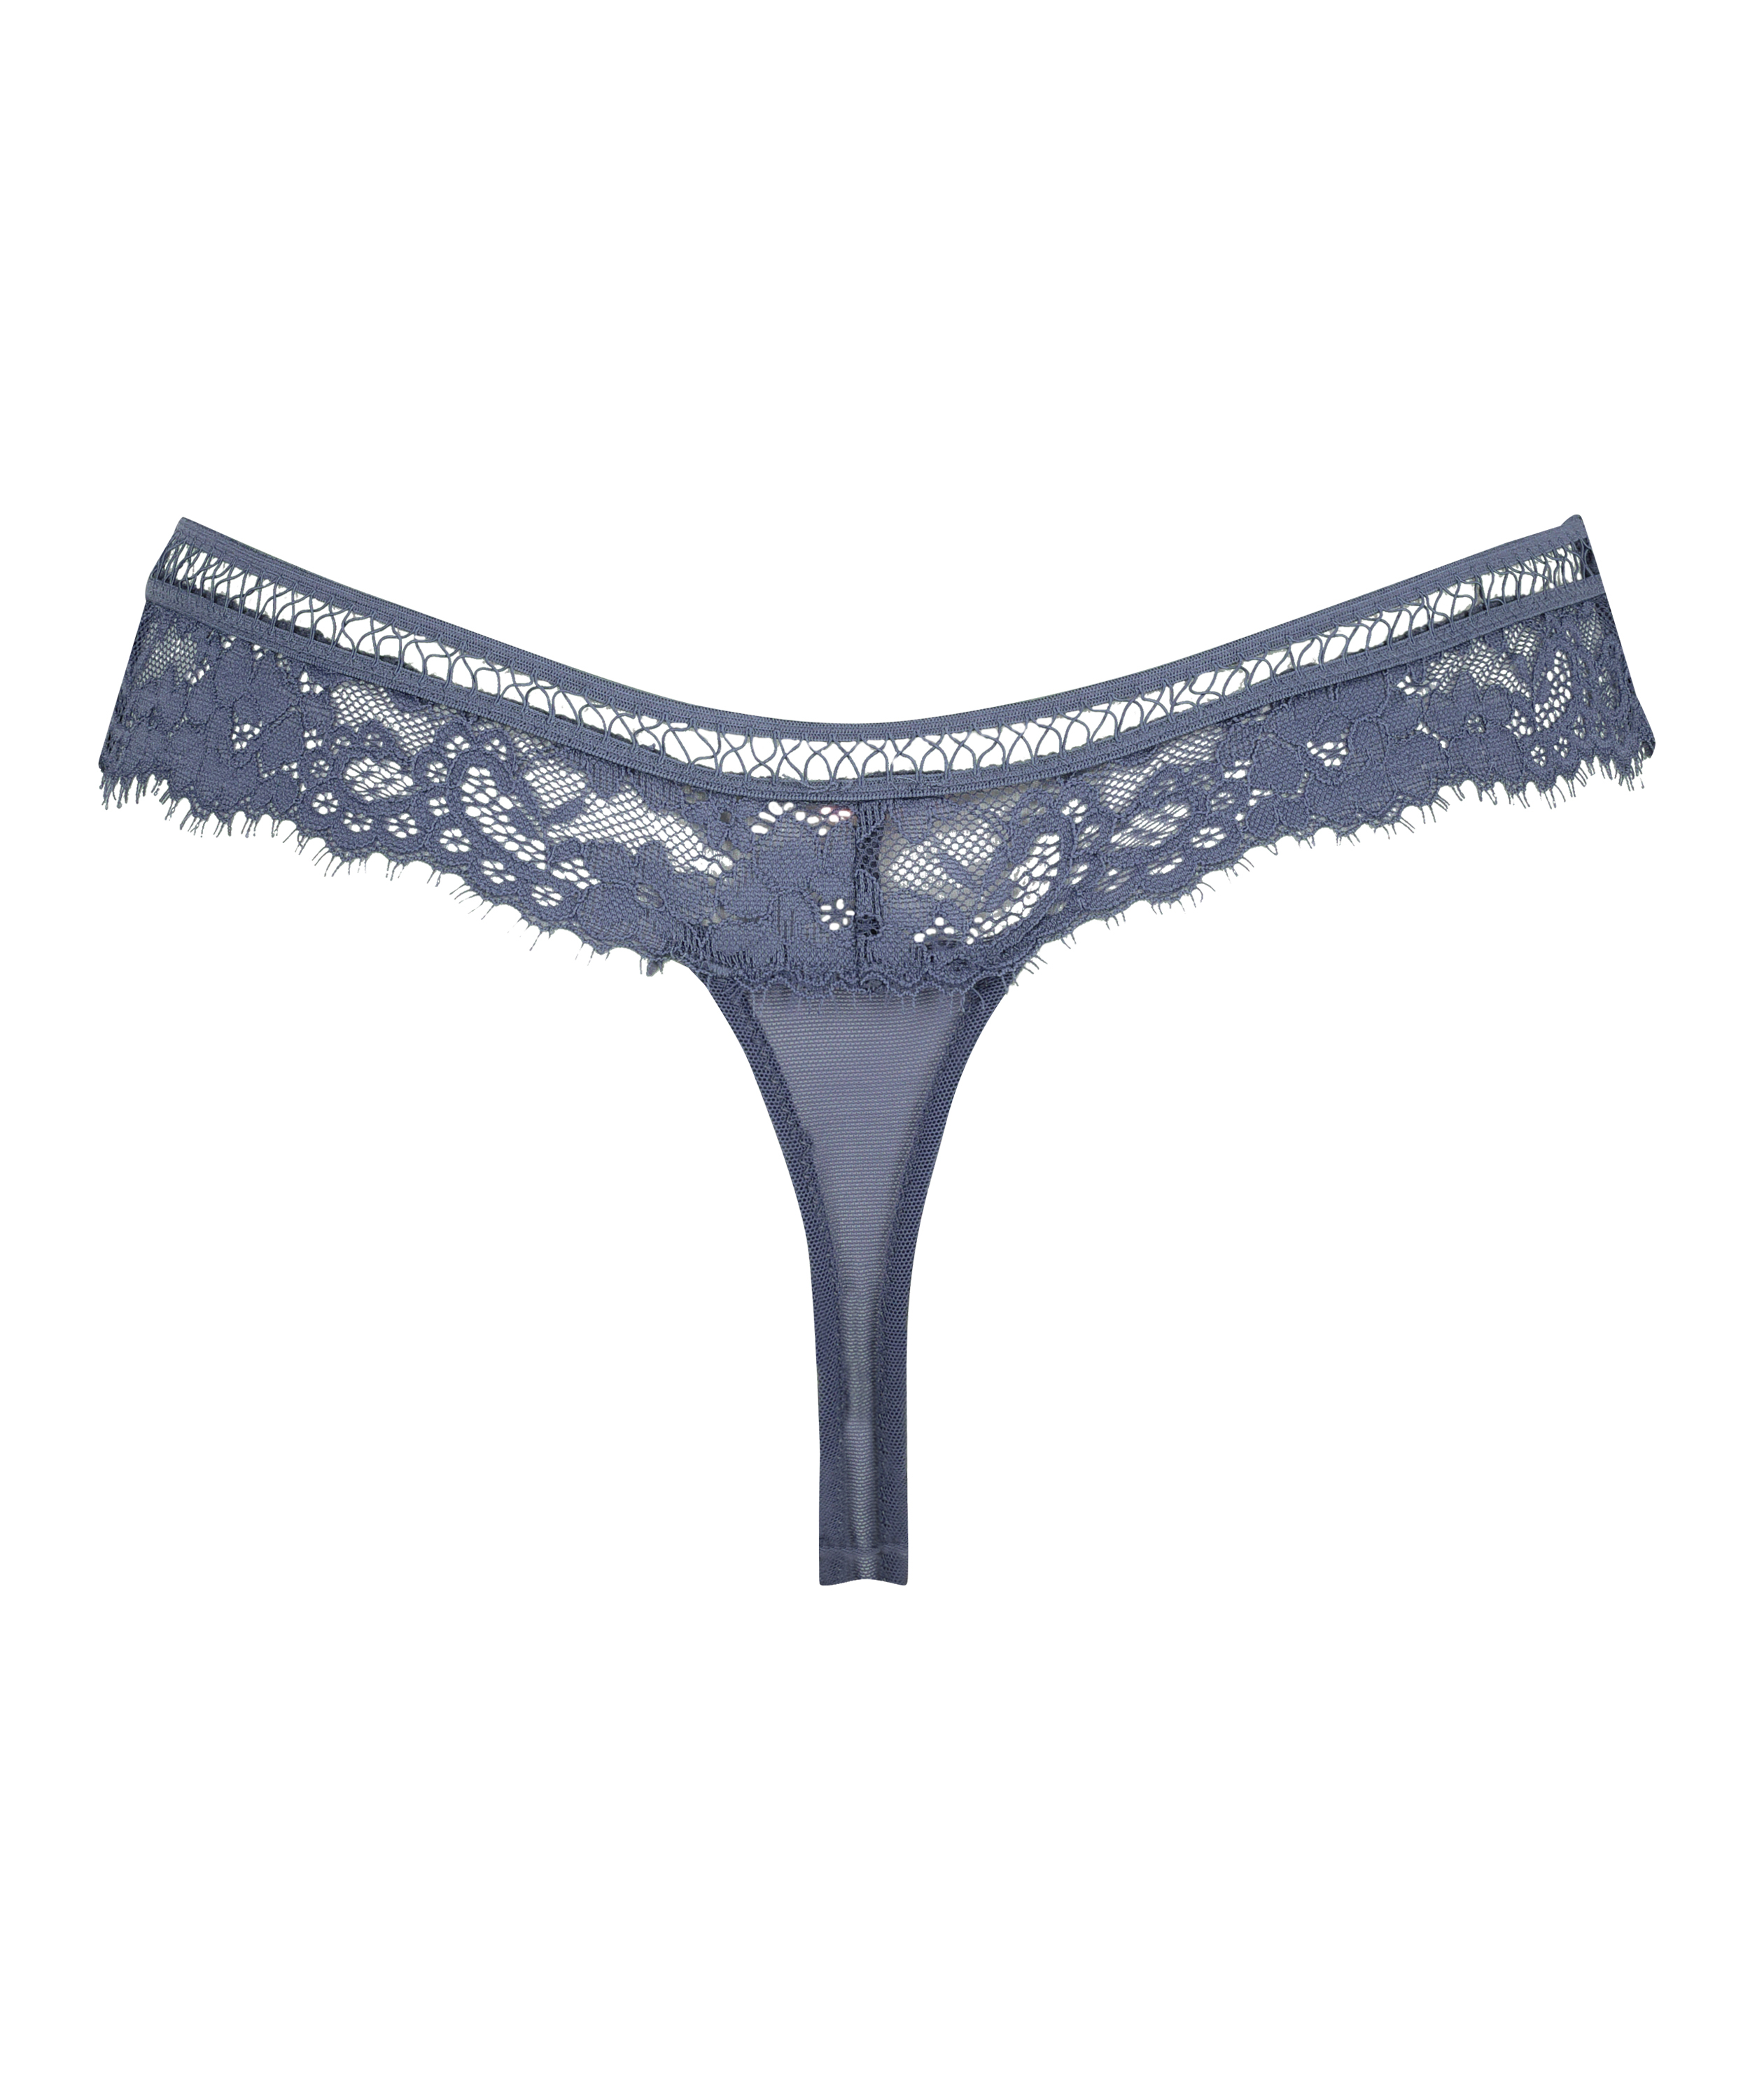 Gianni extra low rise thong, Blue, main